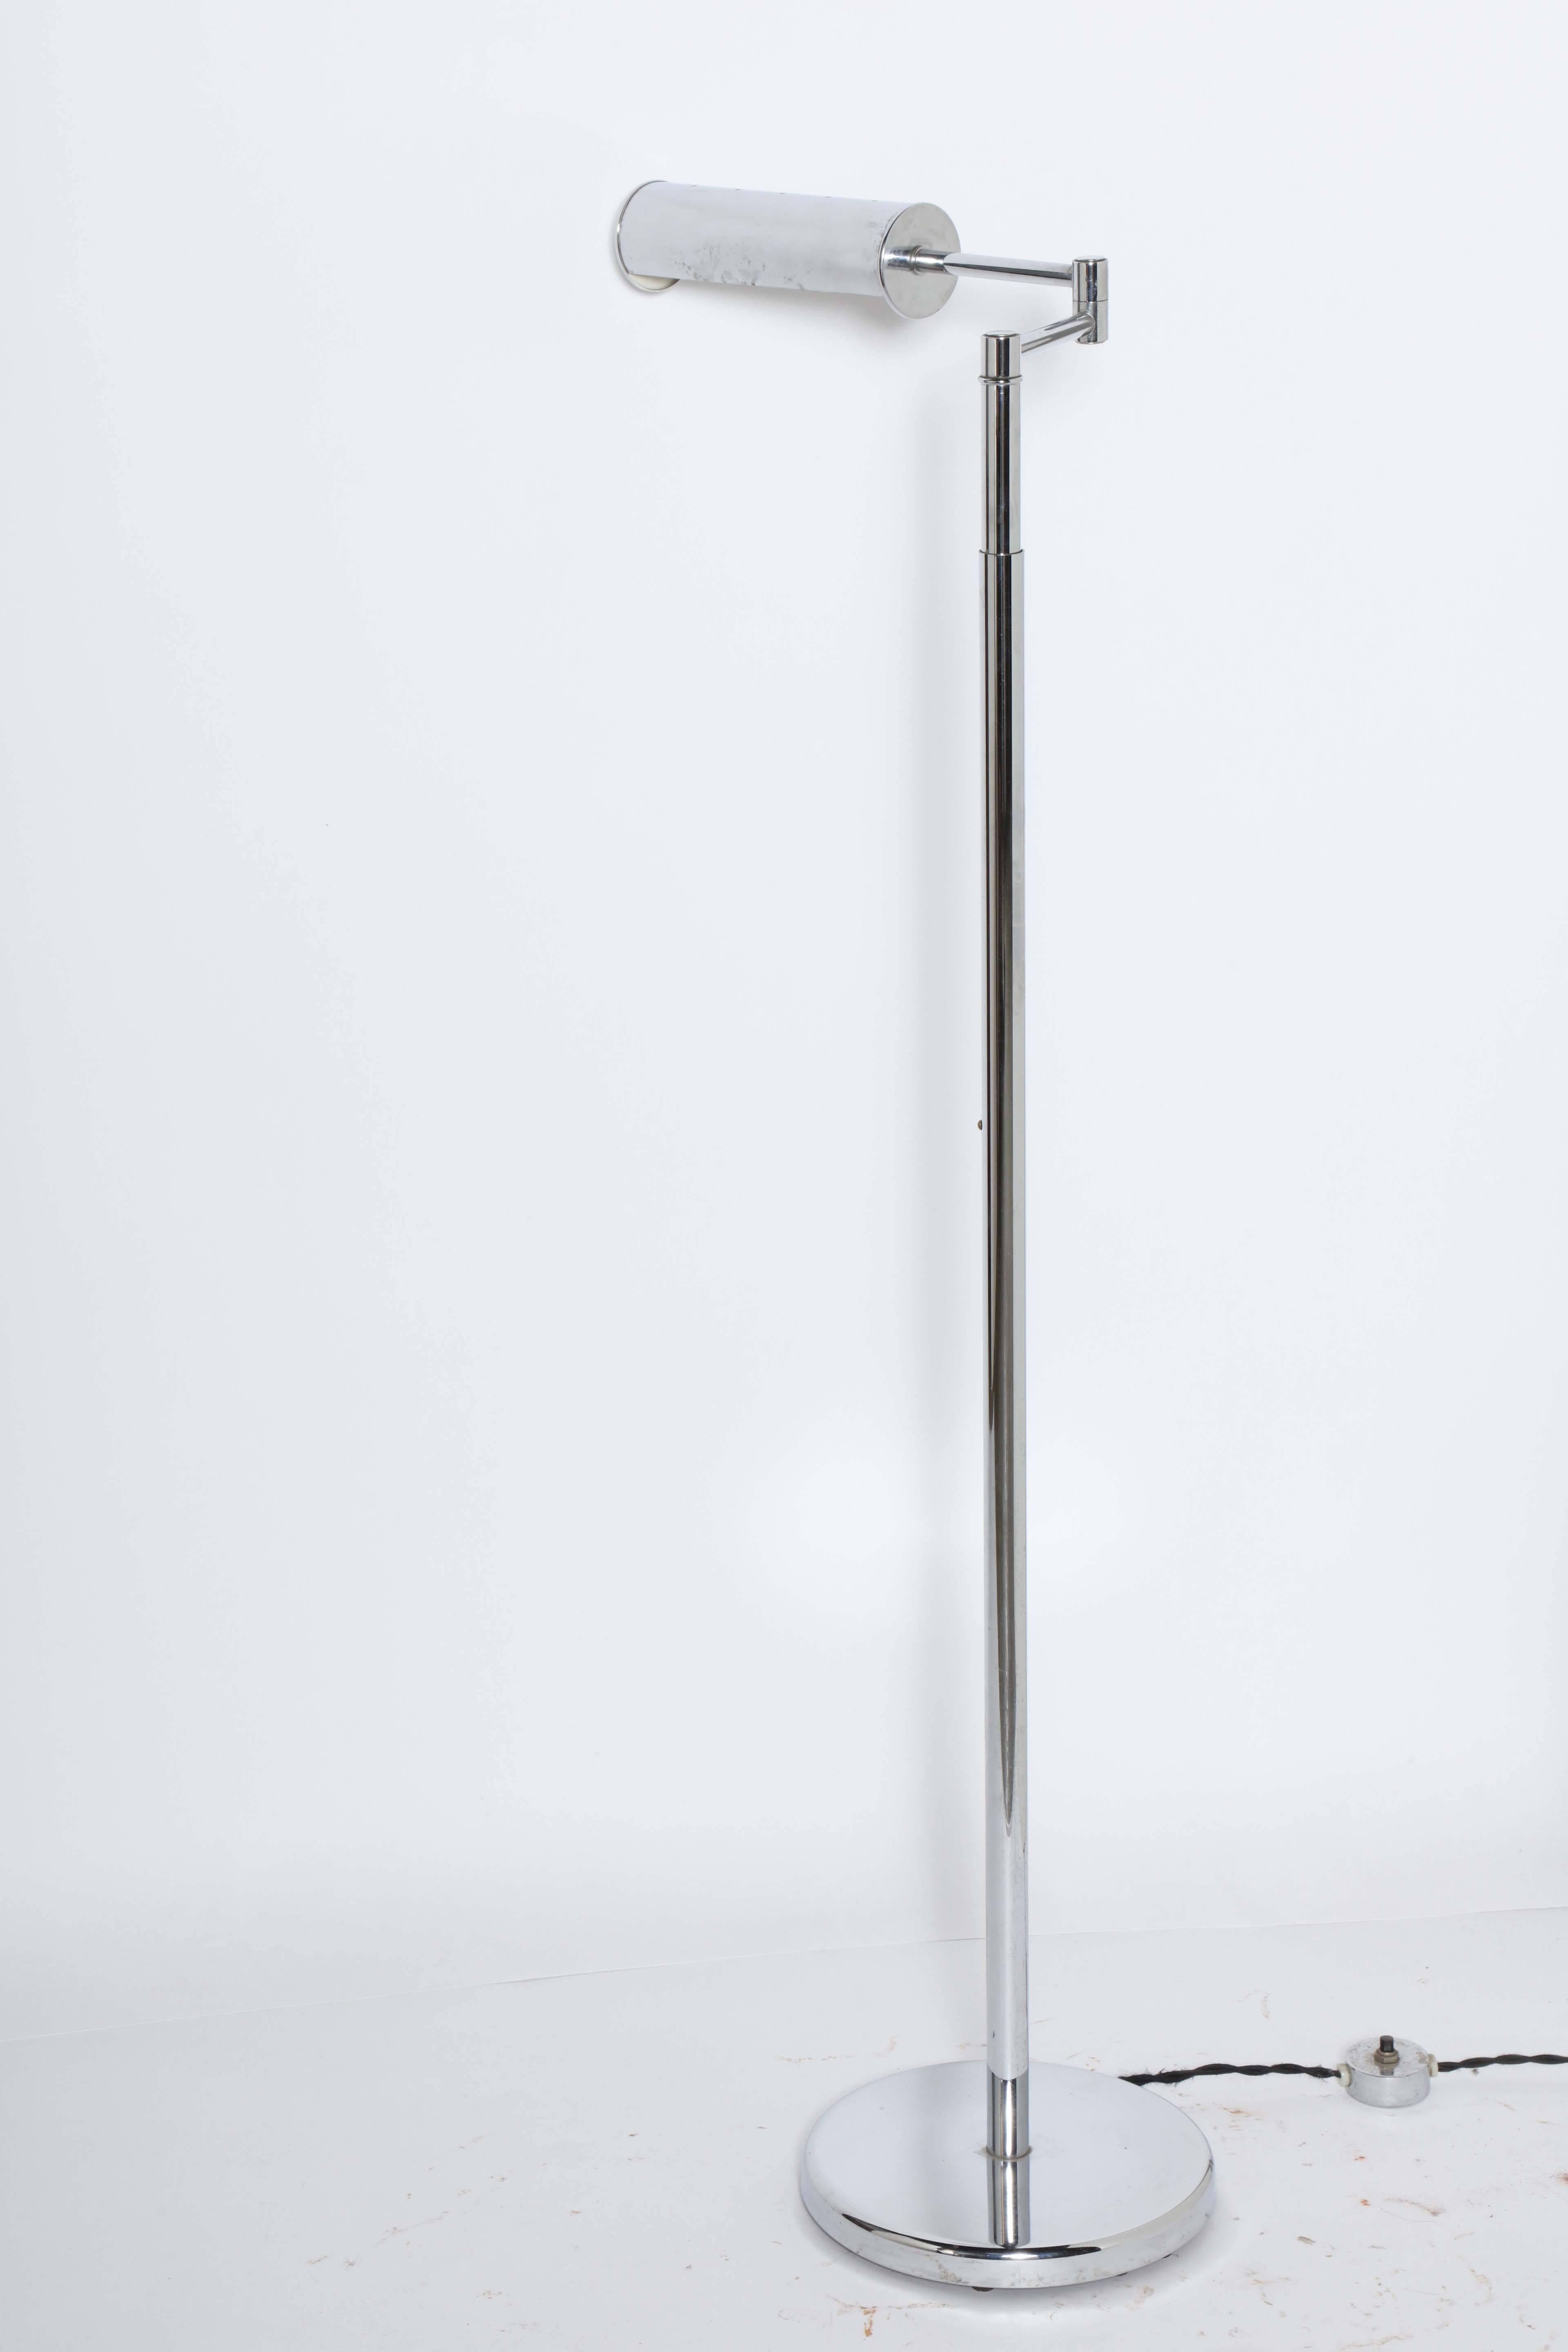 1960s International style Nessen Studios Adjustable swing arm Chrome Floor Lamp. Featuring Chrome adjustable height stem, vented cylindrical Chrome shade with round Chrome base. Lamp head measures 9L. Width of Lamp and arm in feature photo measures